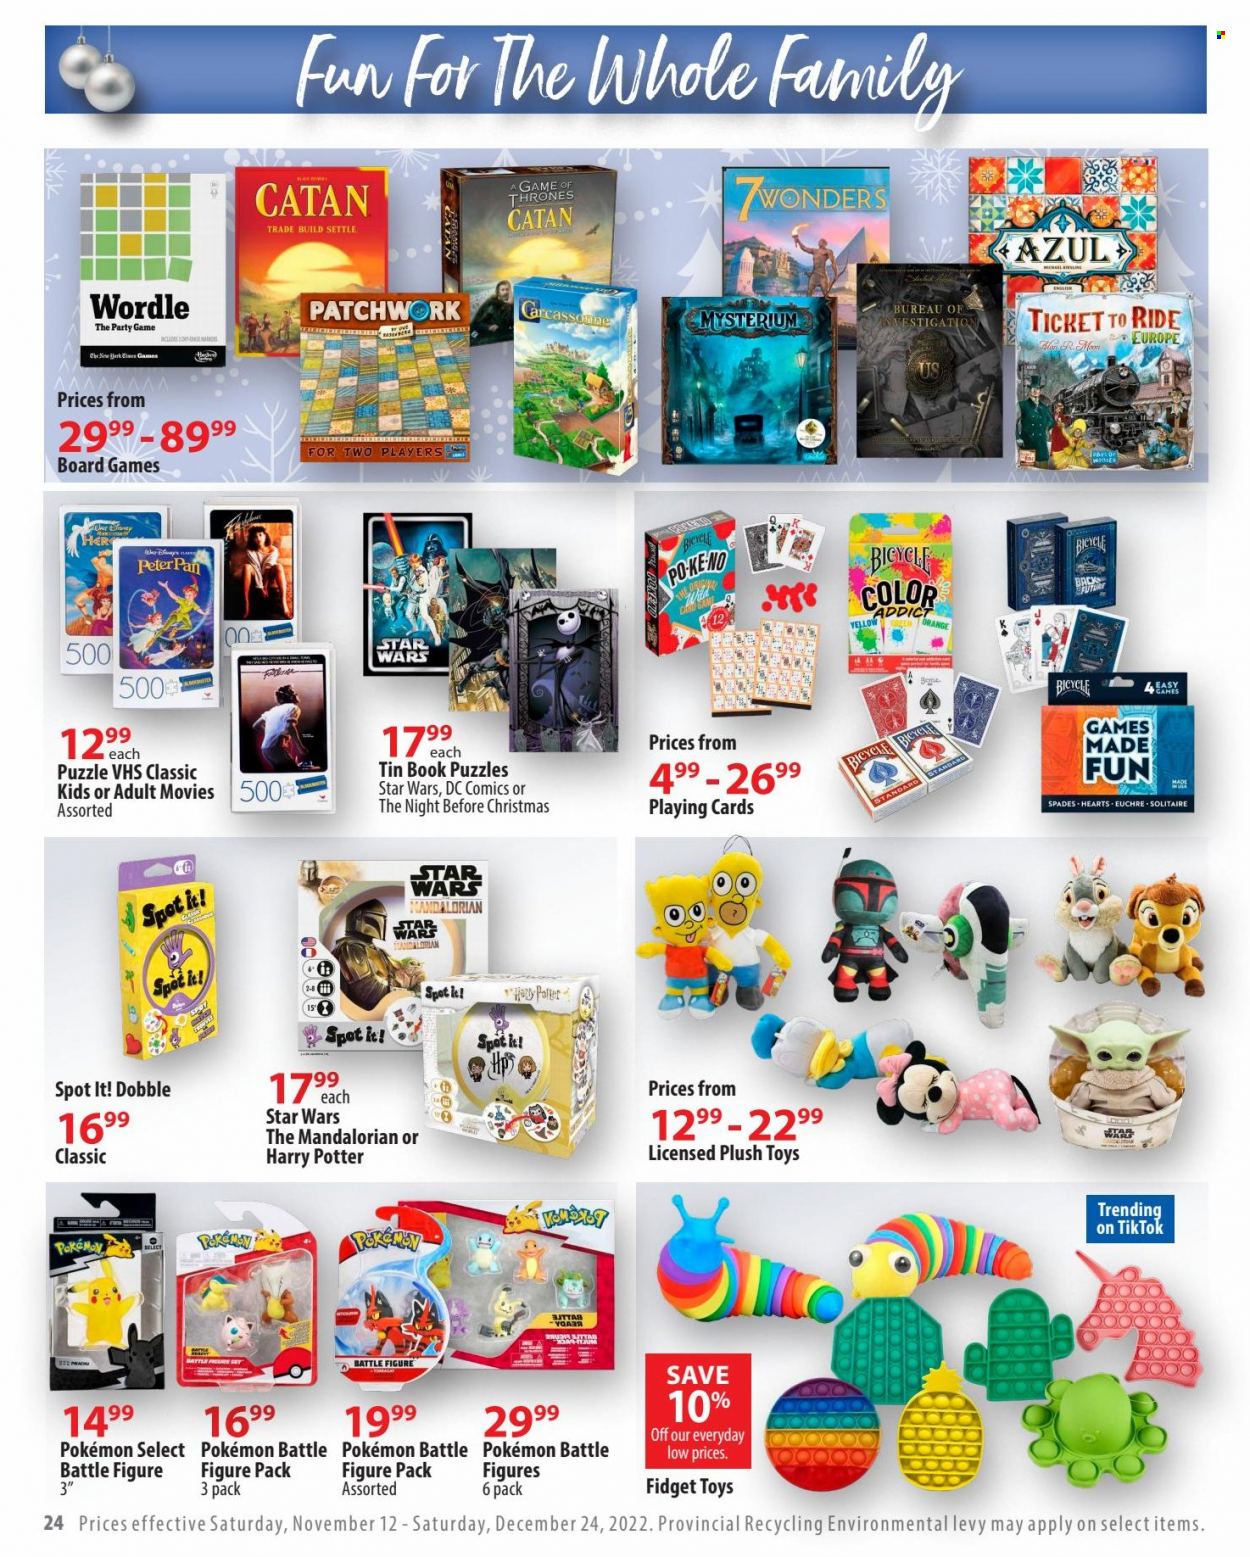 thumbnail - London Drugs Flyer - November 12, 2022 - December 24, 2022 - Sales products - Hewlett Packard, Disney, pan, Harry Potter, Pokémon, book, playing cards, Pikachu, toys, board game, Ticket to Ride, puzzle. Page 24.